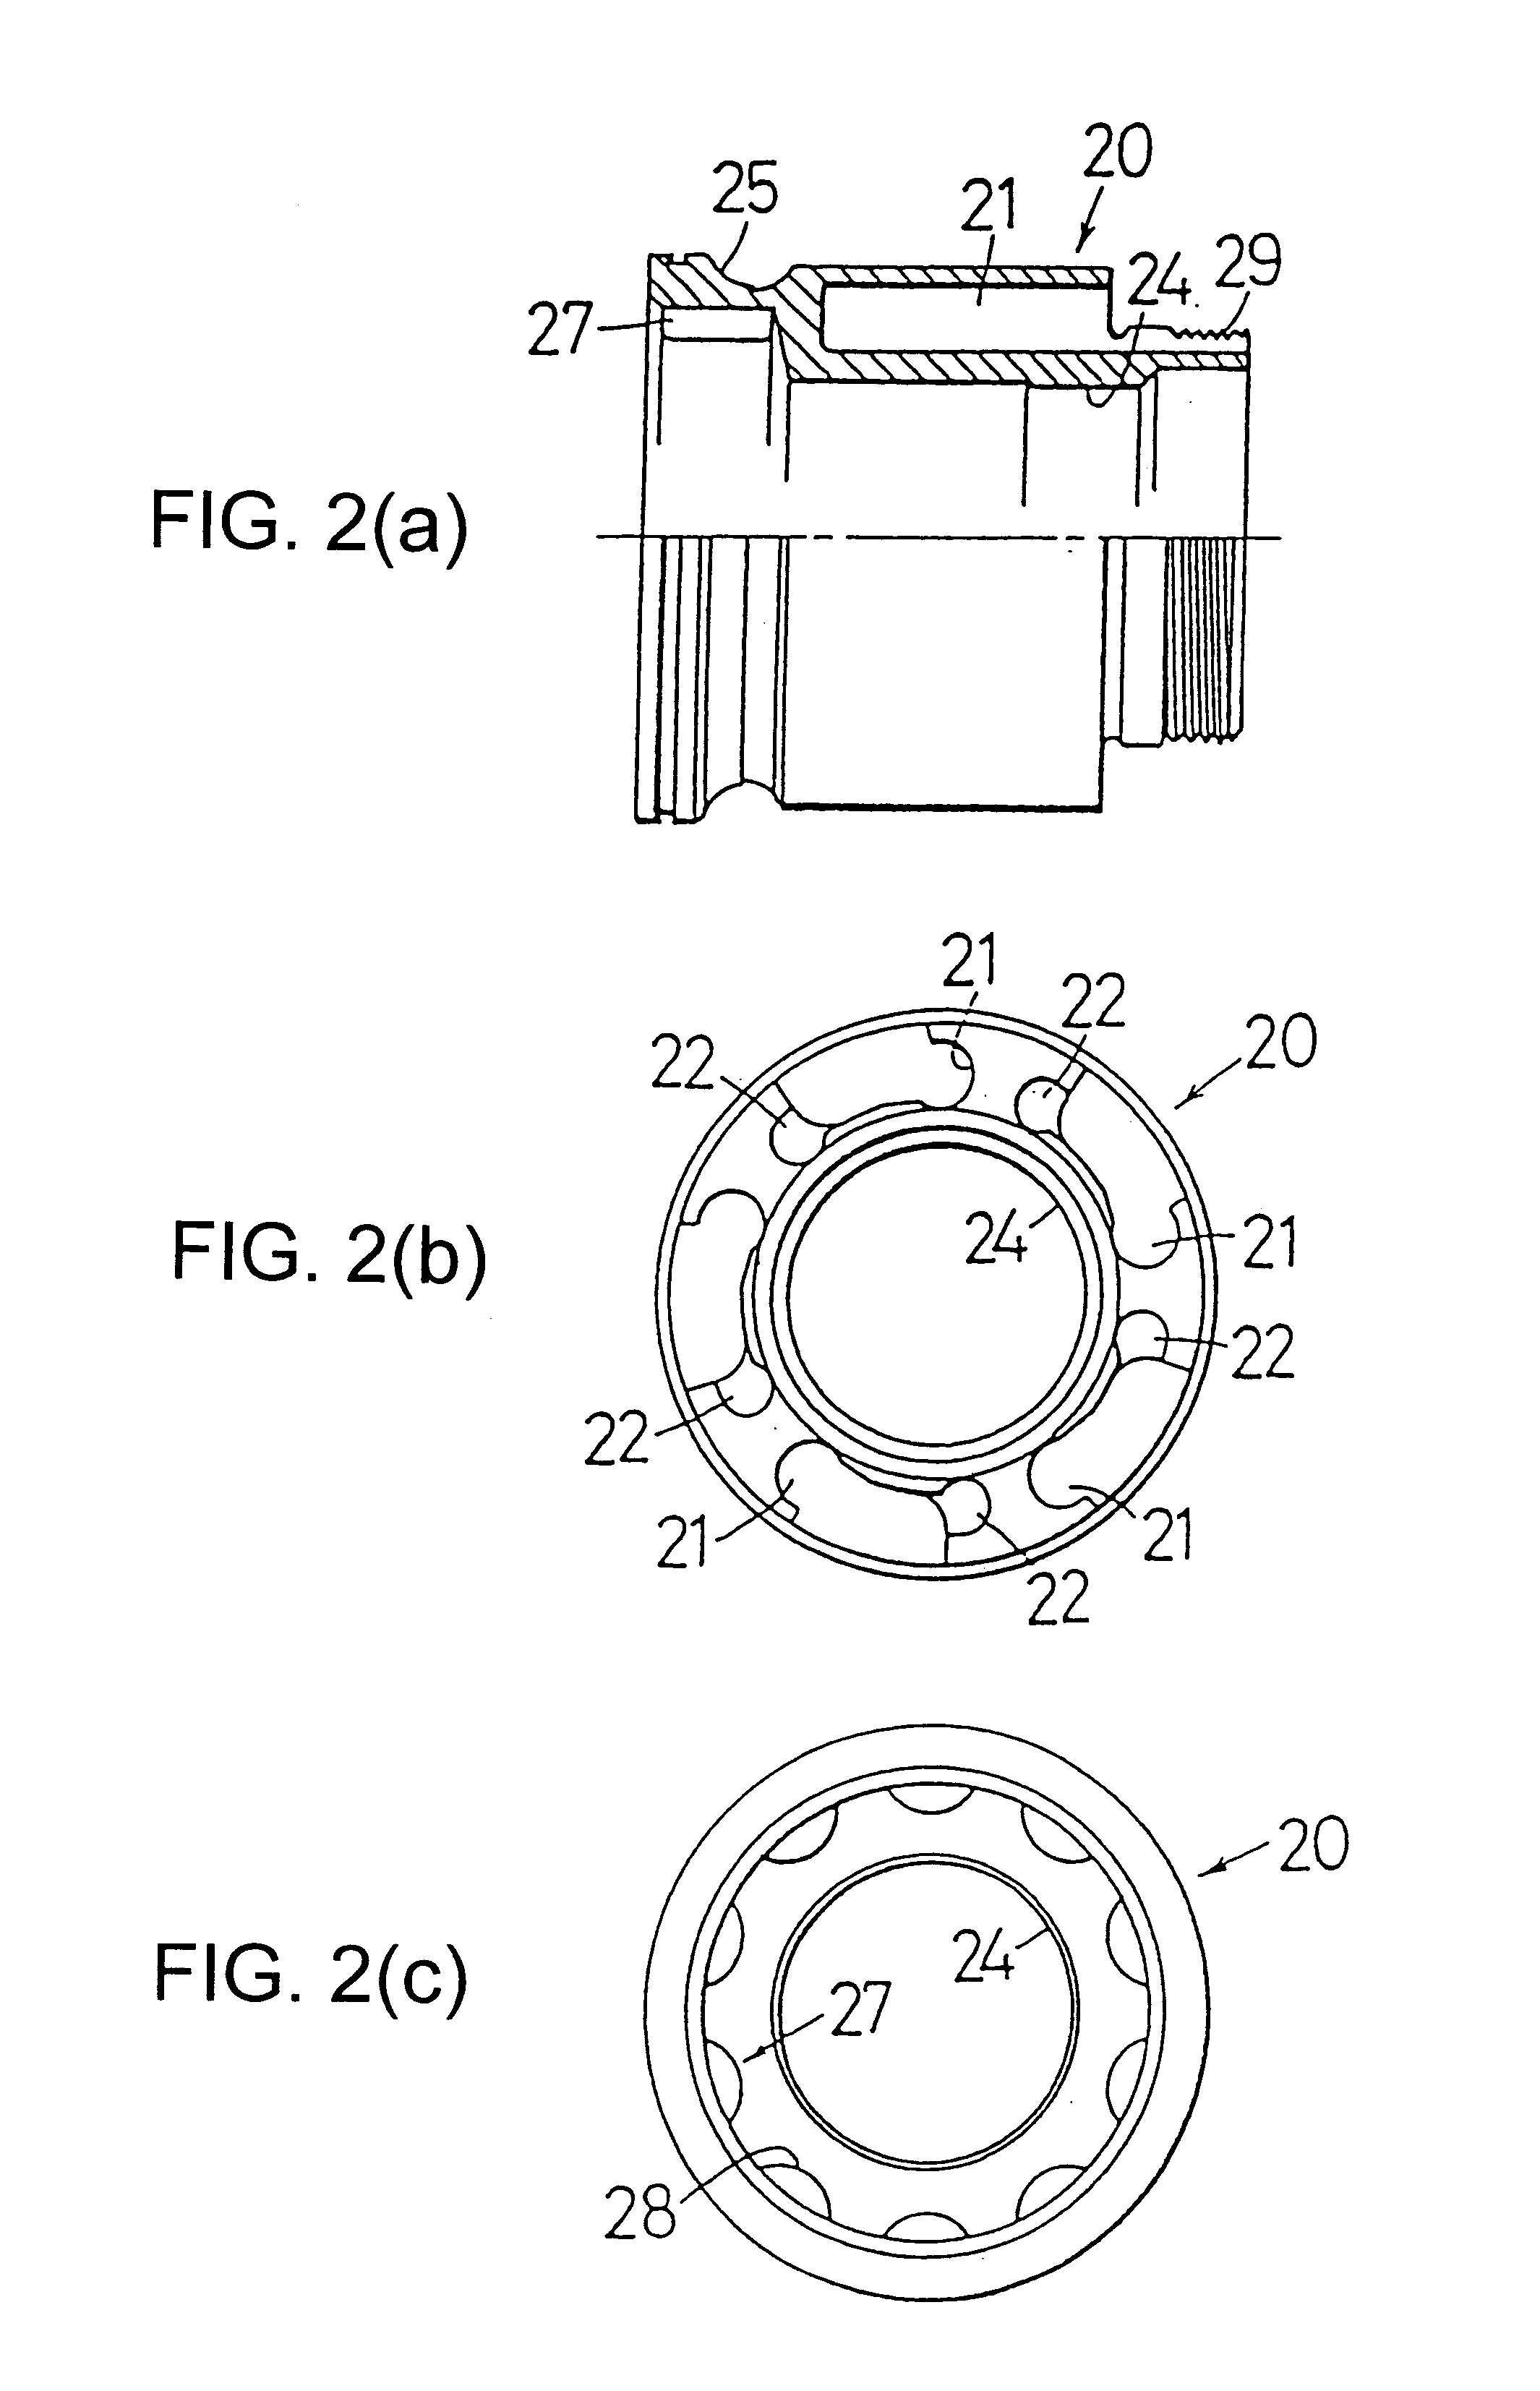 Pawl noise dampening mechanism for a bicycle freewheel